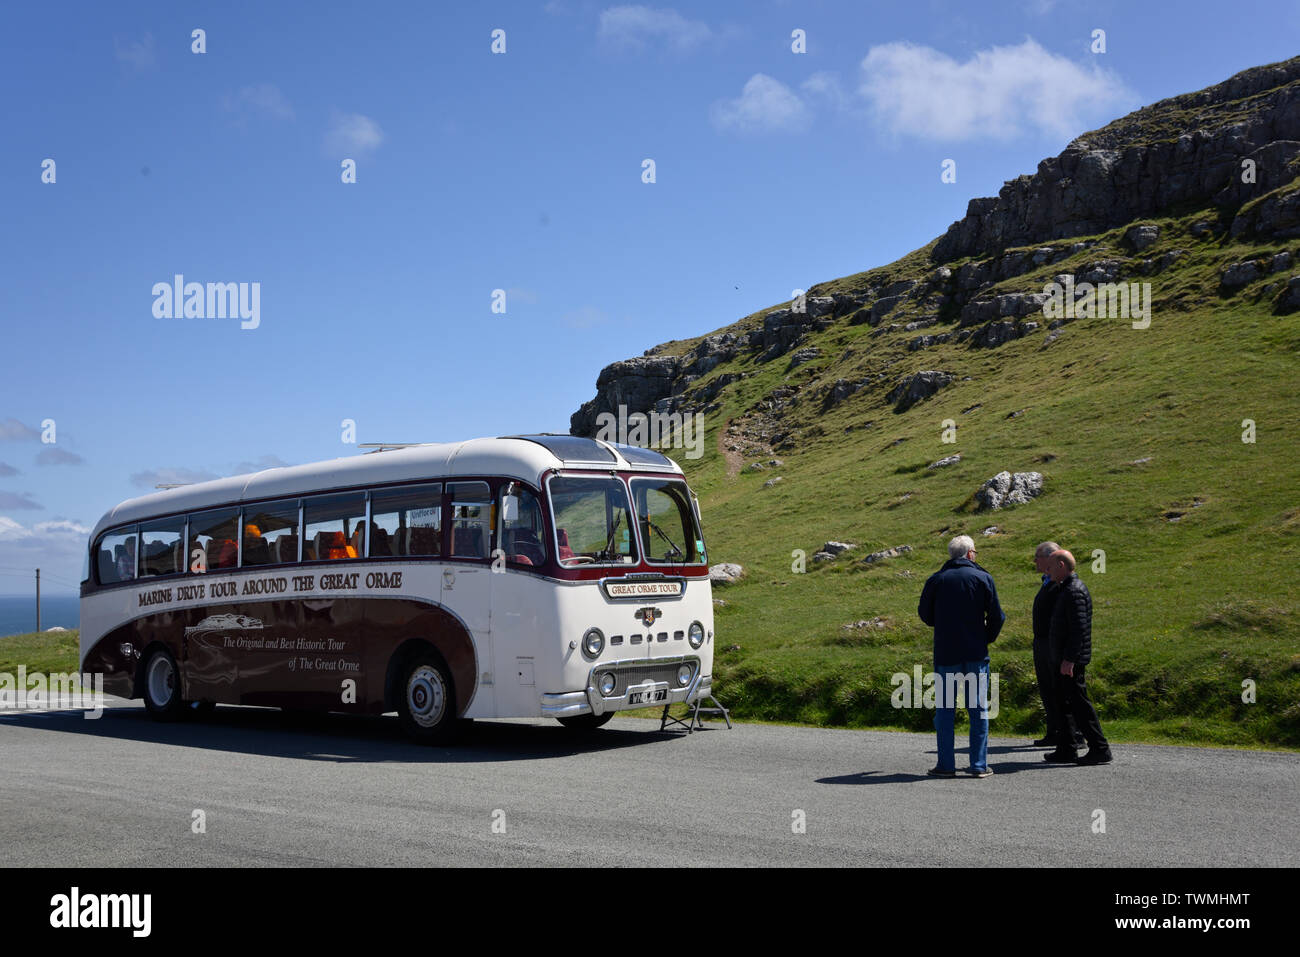 Great Orme and all it's tour bus at the top of the great orme cliff views. Stock Photo